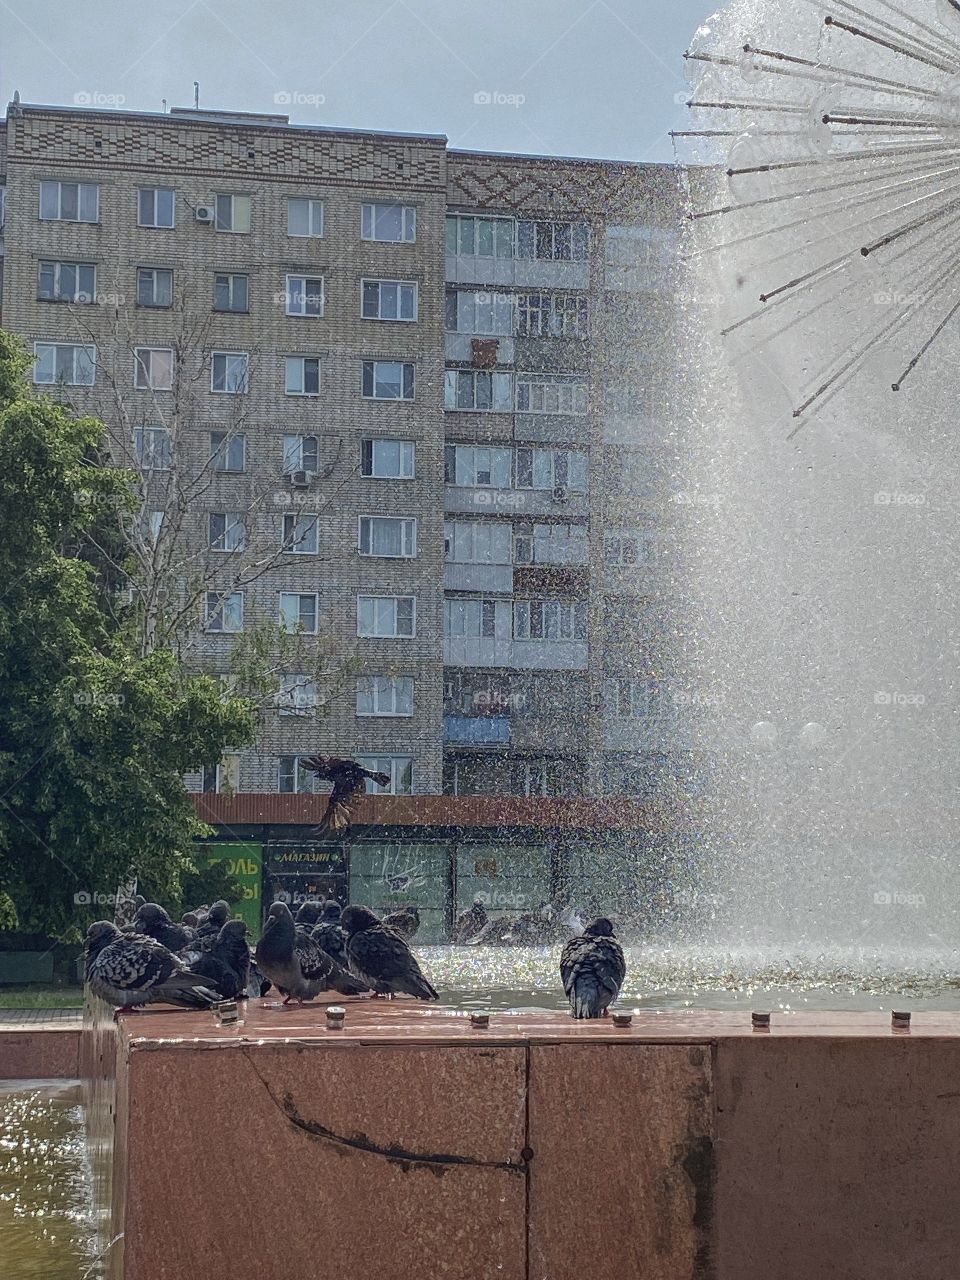 pigeons swim in the fountain